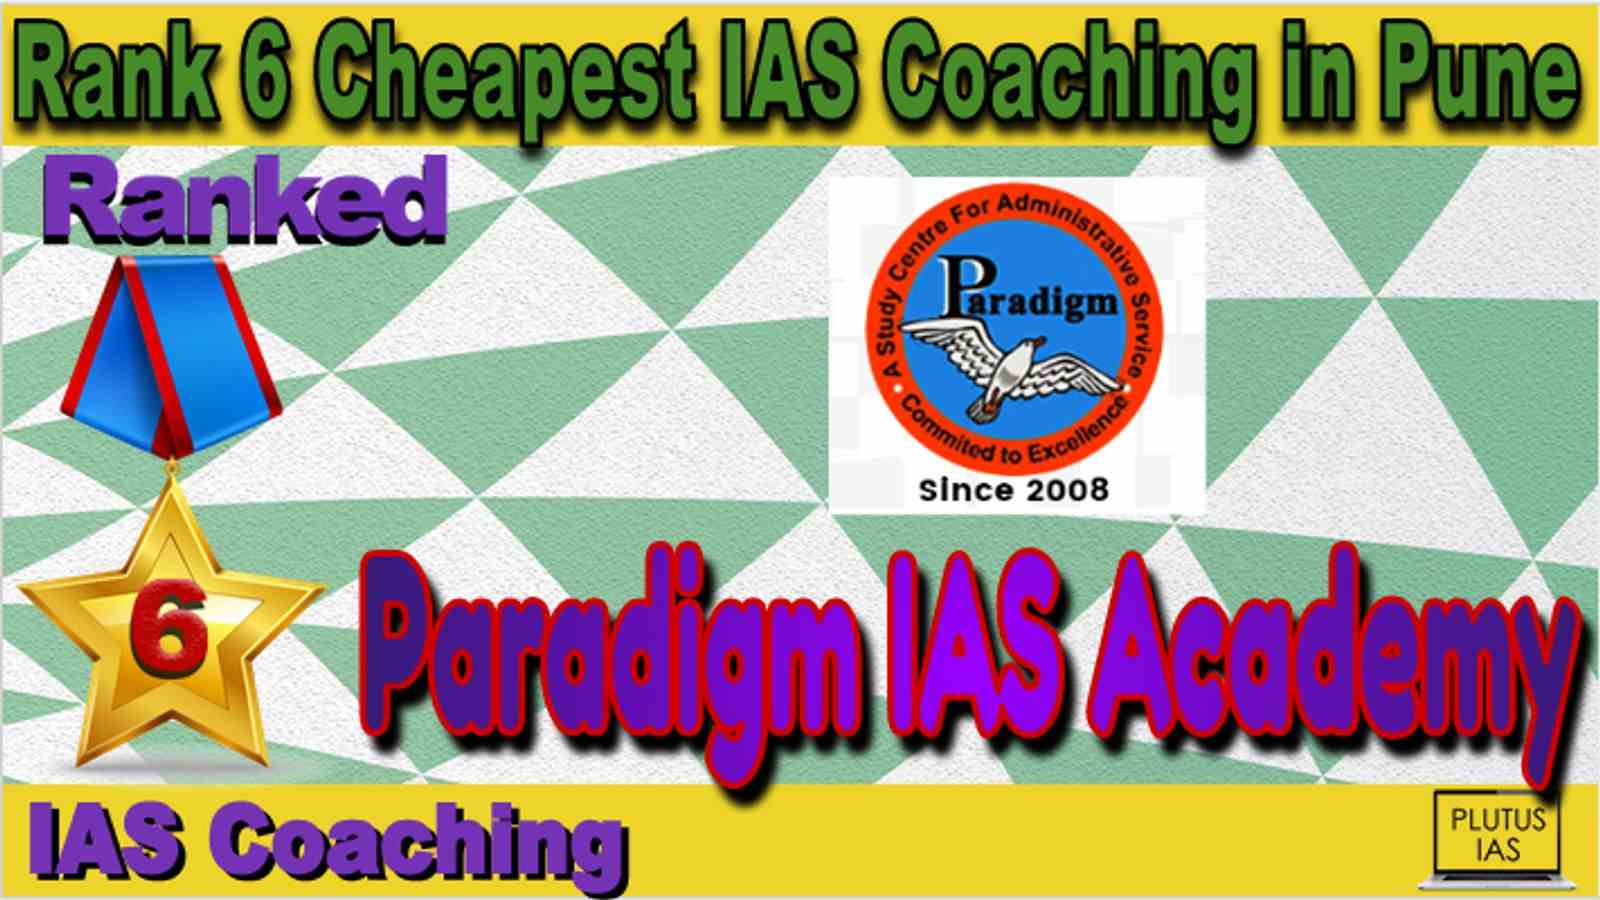 Rank 6 Cheapest IAS Coaching in Pune